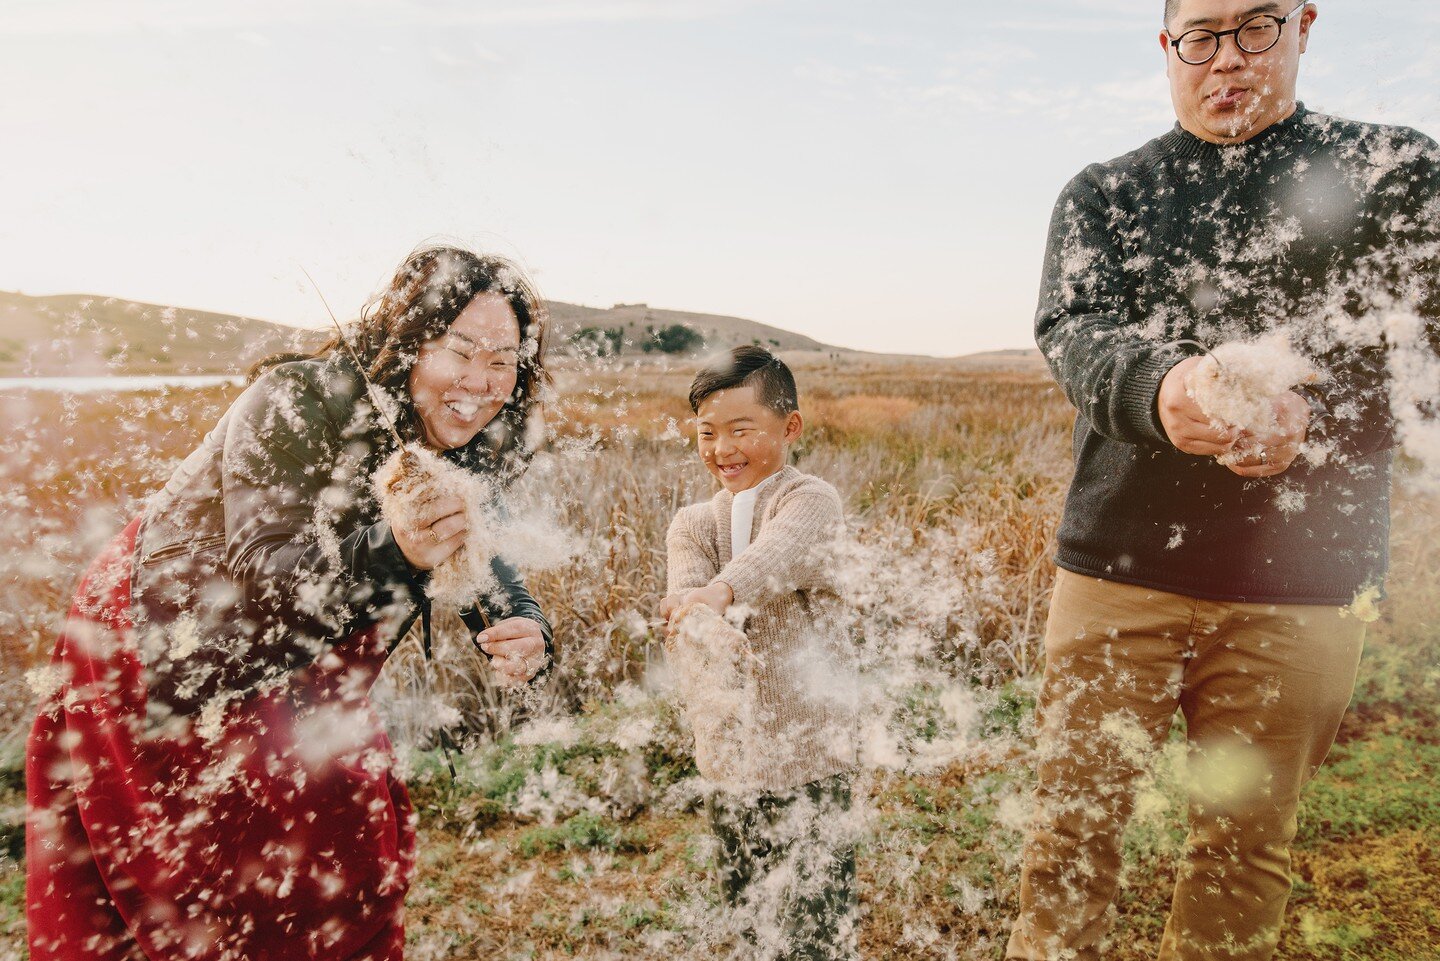 Bodrey &amp; Kenny's wedding was one of the most fun and buoyant weddings we've photographed, so of course their family photos were full of movement, belly laughs, and getting entangled by a million cattail seeds. (Sorry to Kenny's wool sweater.) An 